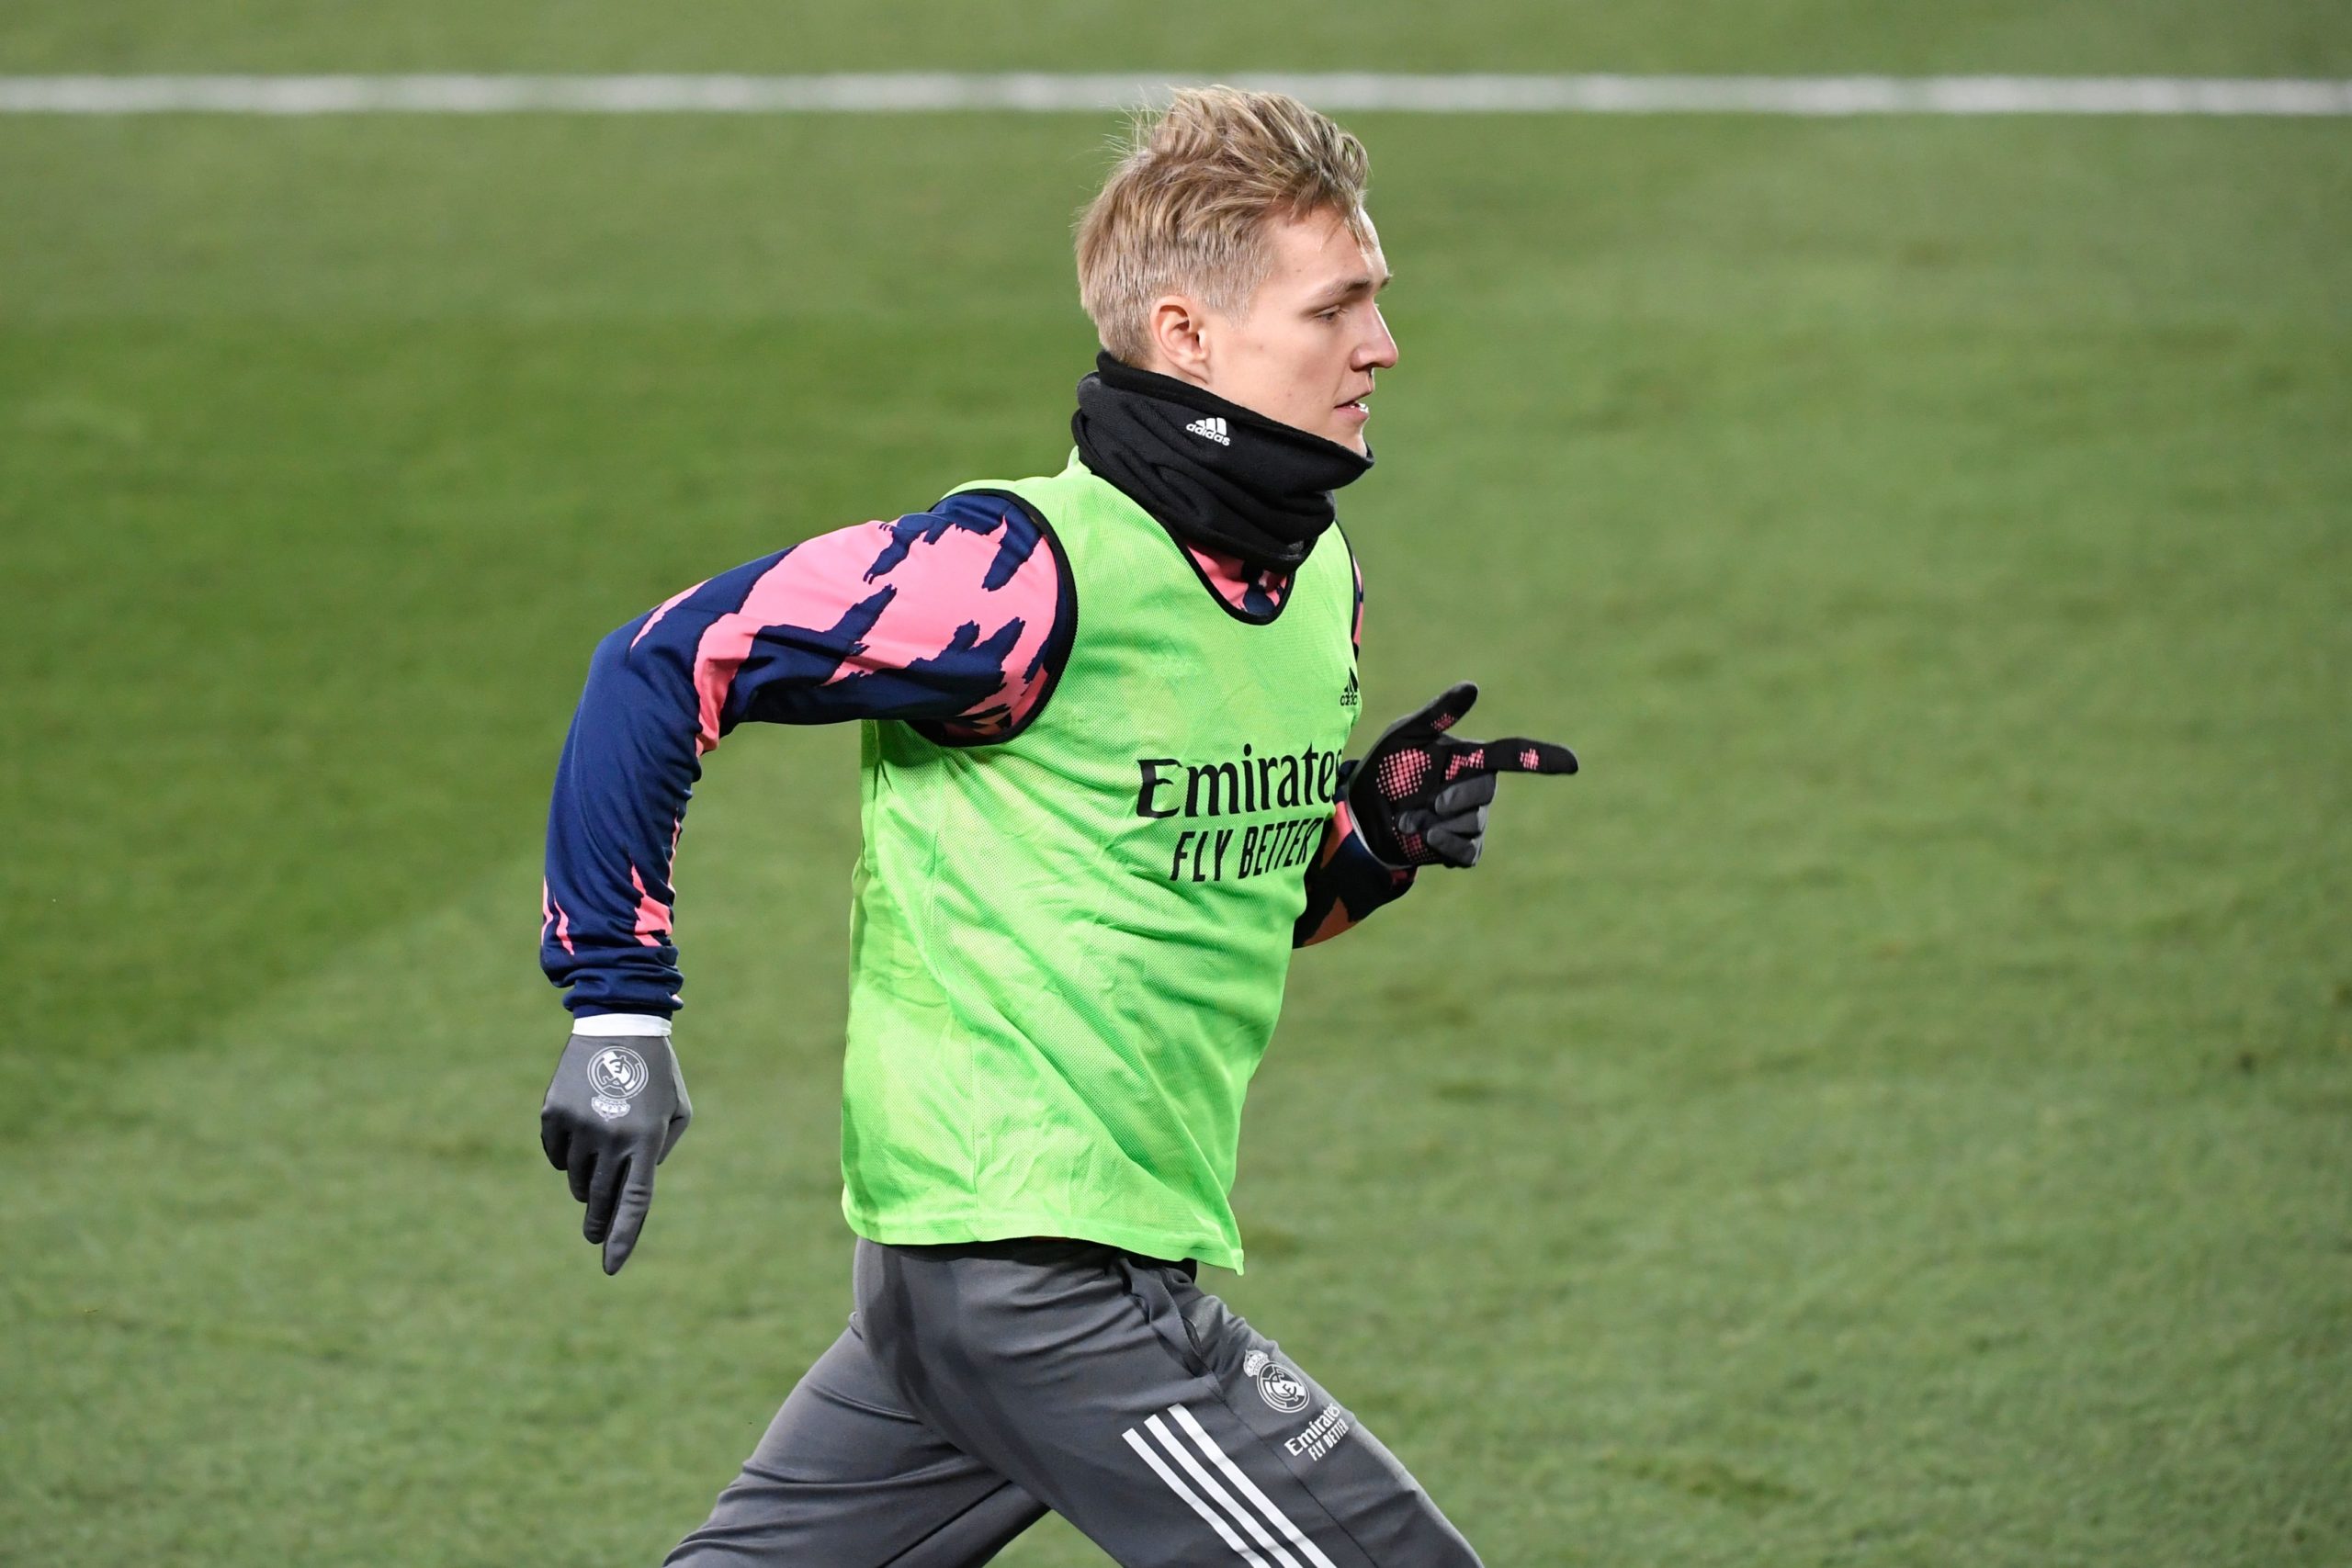 Predicted Arsenal Lineup Vs Manchester United - Will Odegaard start?